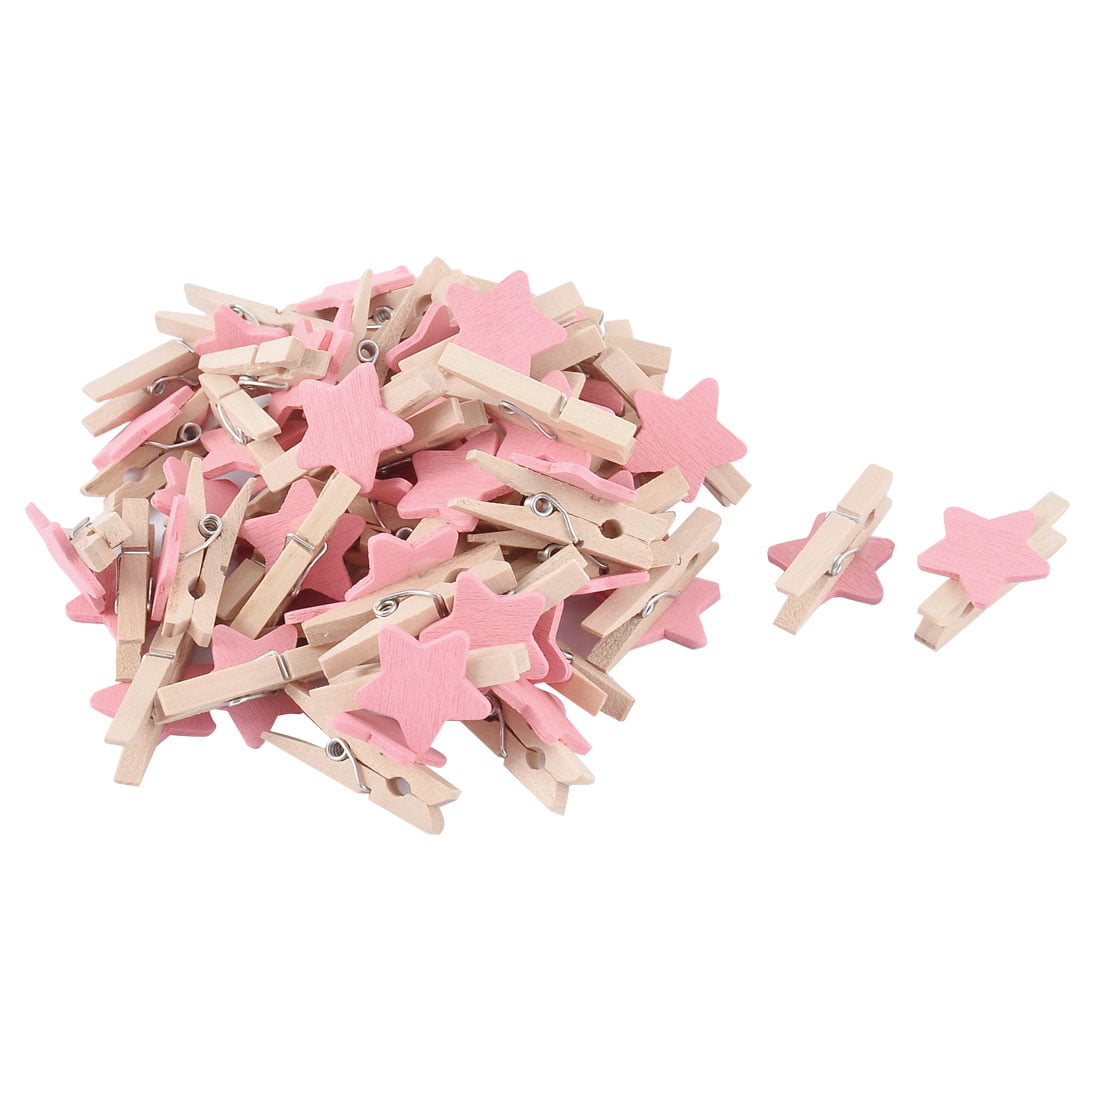 50pcs Love Wood Clips Beautiful Small Fixation Clips for Photo Painting Pink 